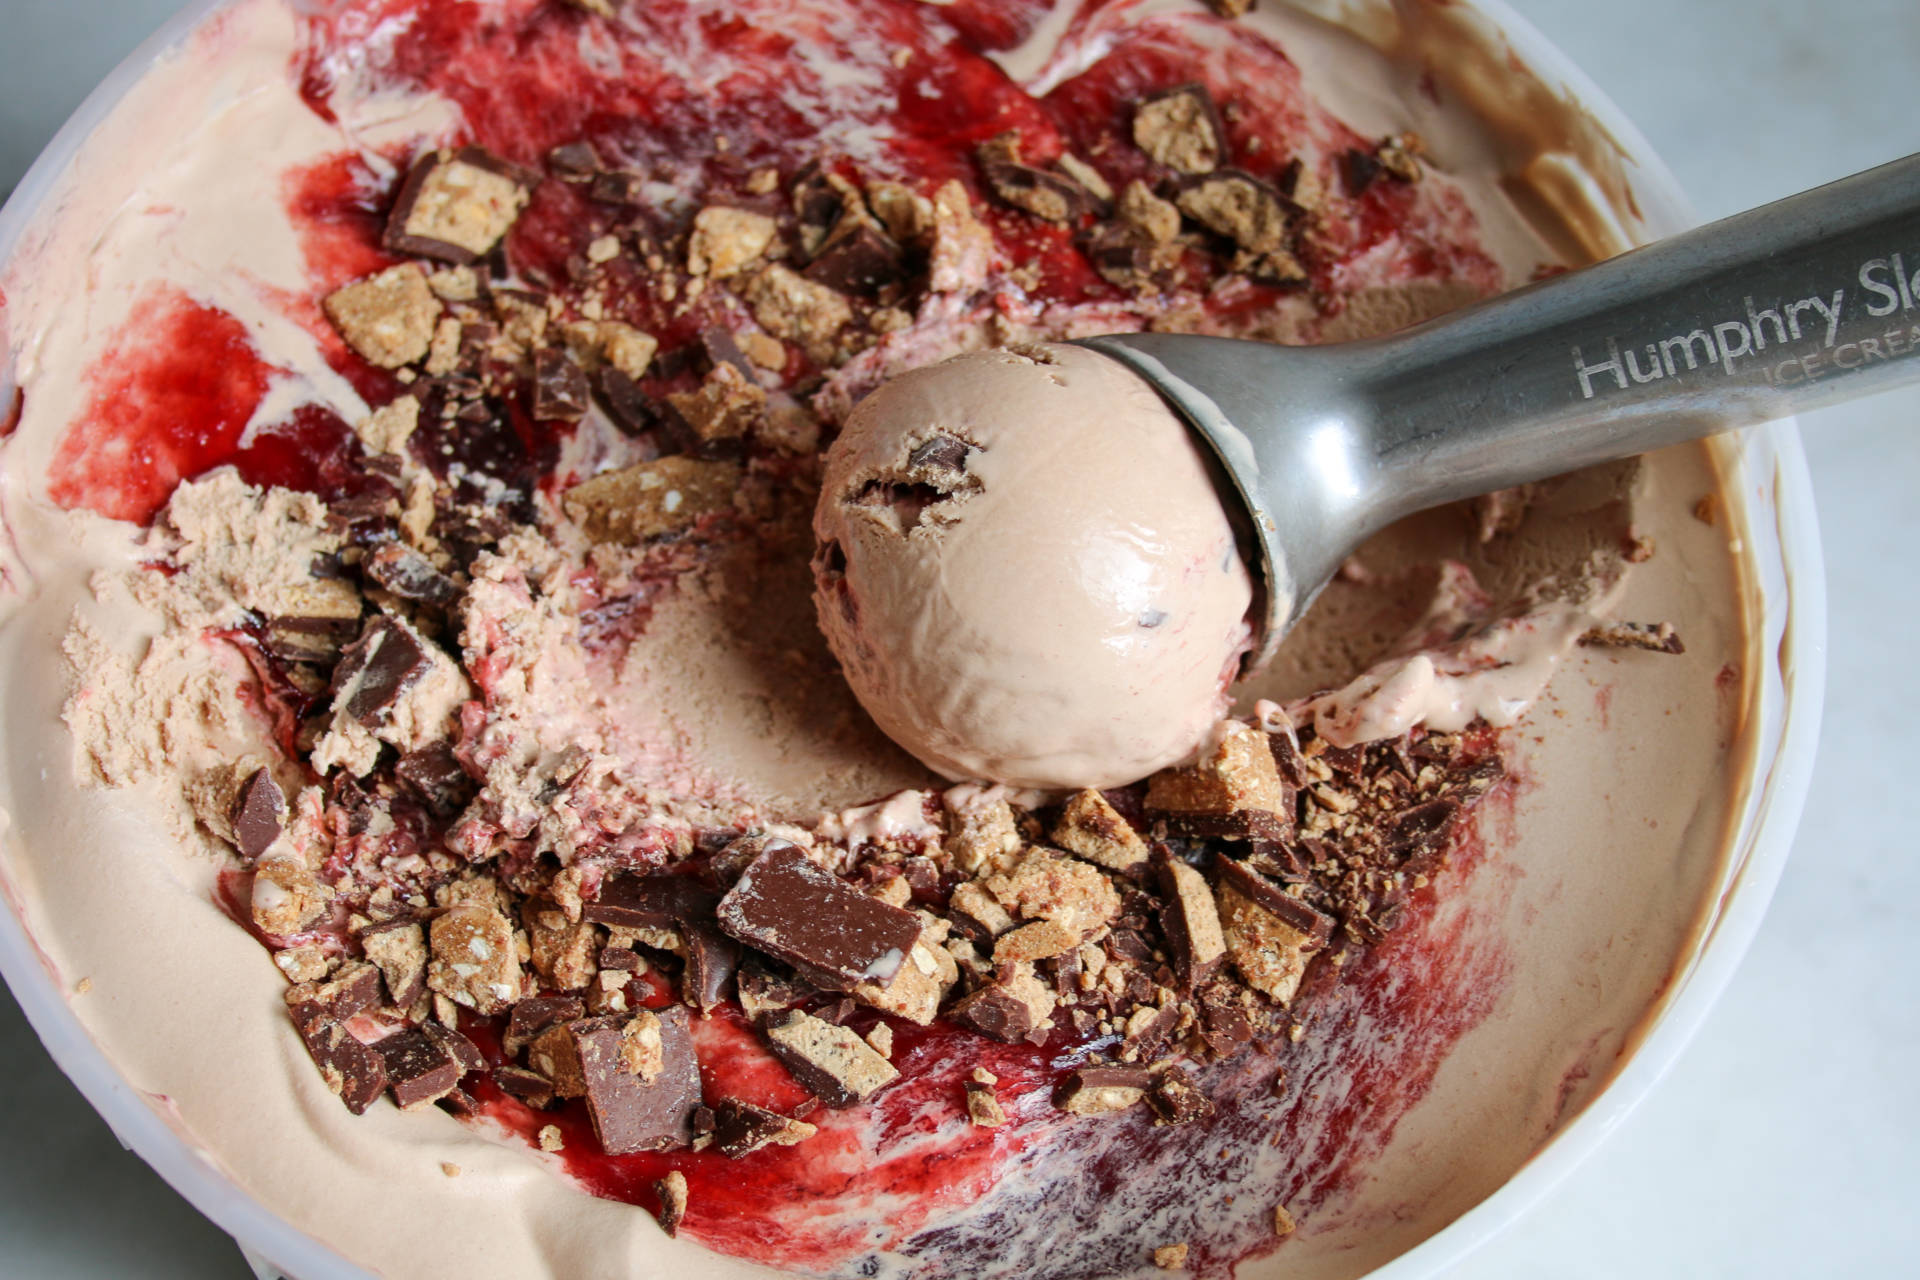 Get your free scoop of OCHO PB&J at Humphry Slocombe on September 15.